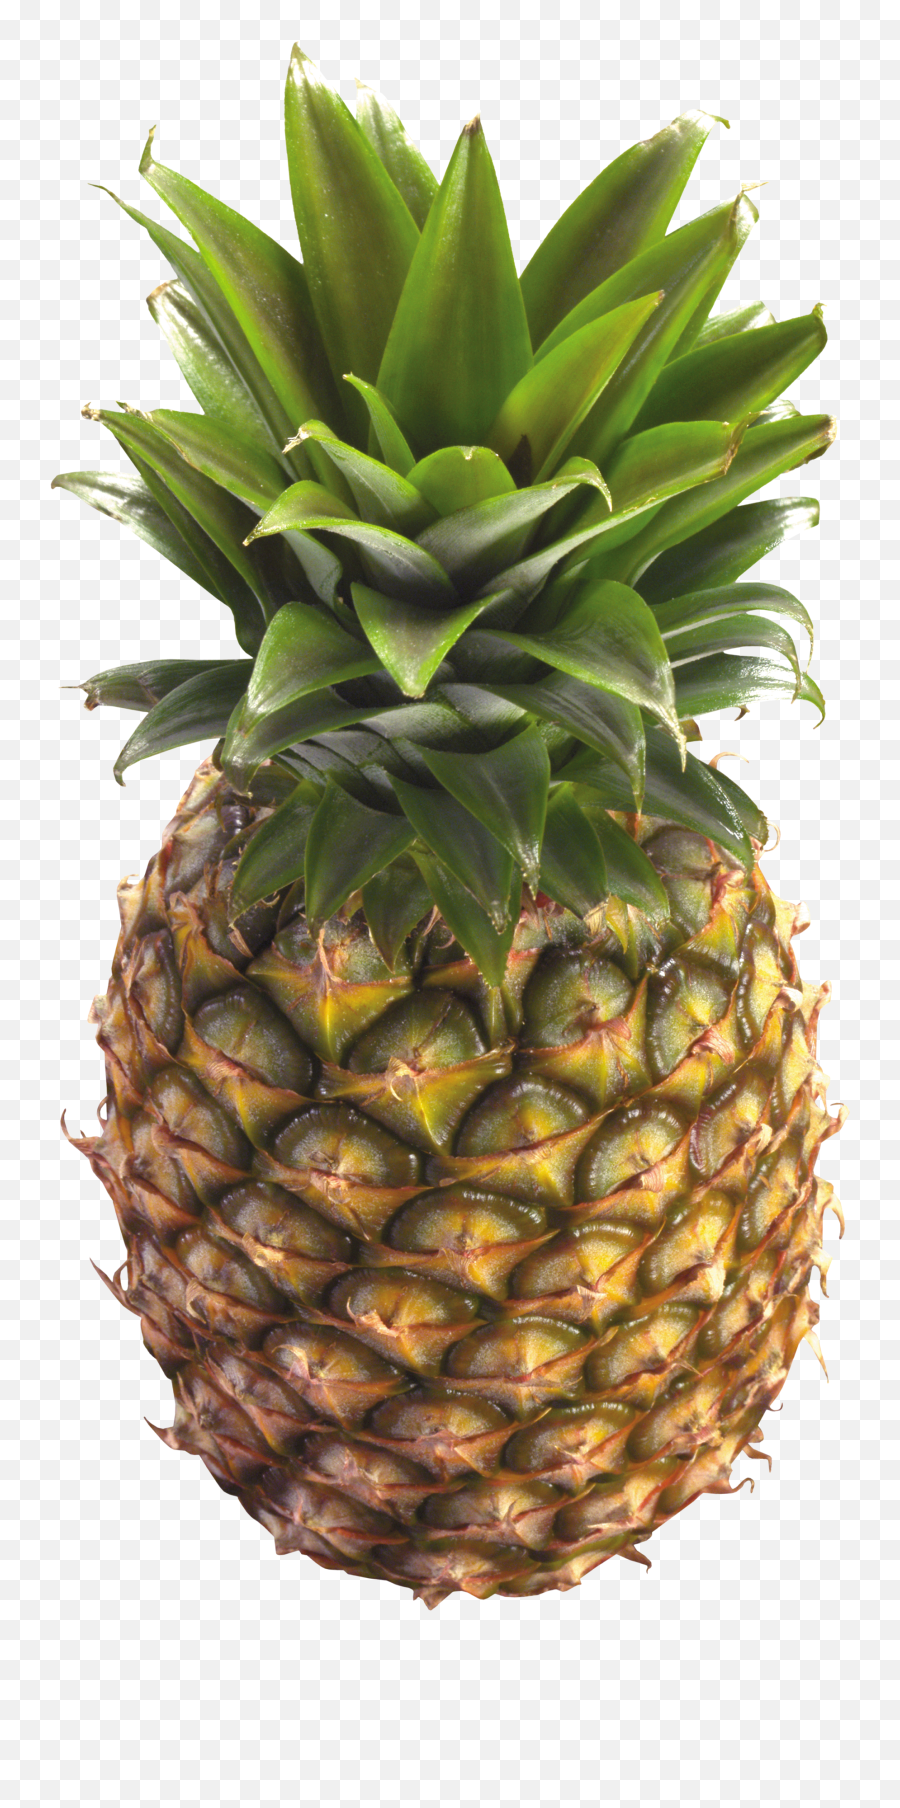 Pineapple Png Images Free Pictures Download - Pineapple With No Background,Pinapple Png